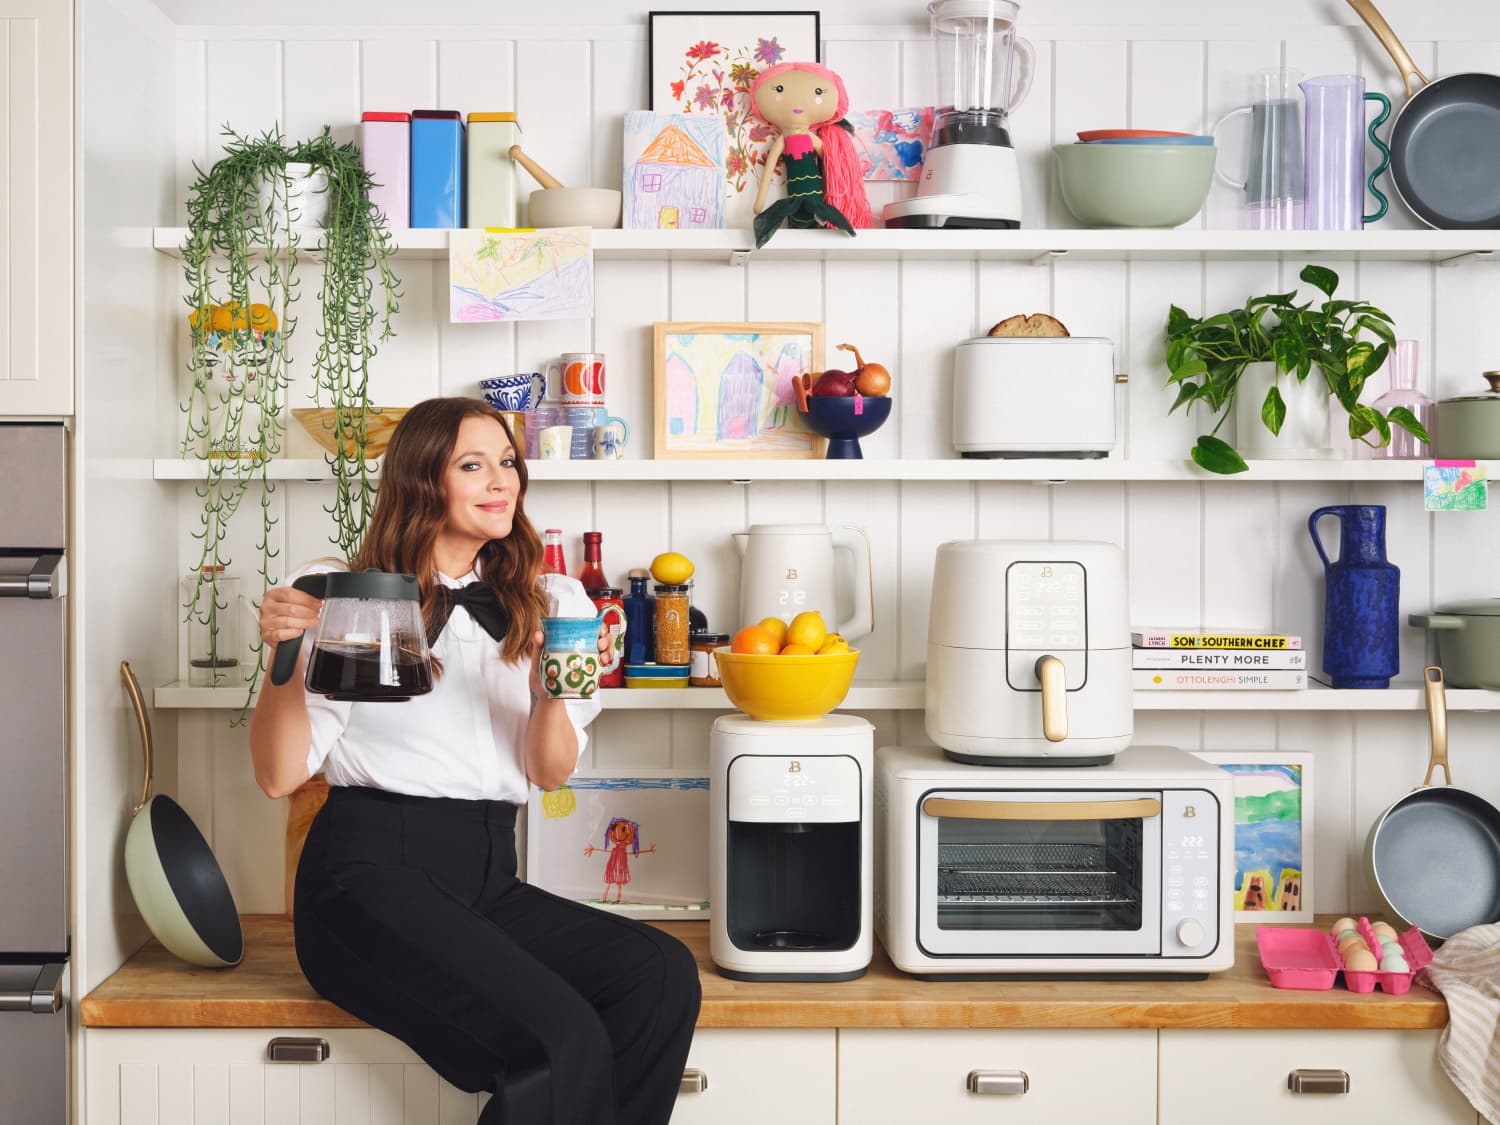 https://cdn.apartmenttherapy.info/image/upload/f_jpg,q_auto:eco,c_fill,g_auto,w_1500,ar_4:3/k%2FDrew-Barrymore-Kitchen-Collection-Lead-Shot